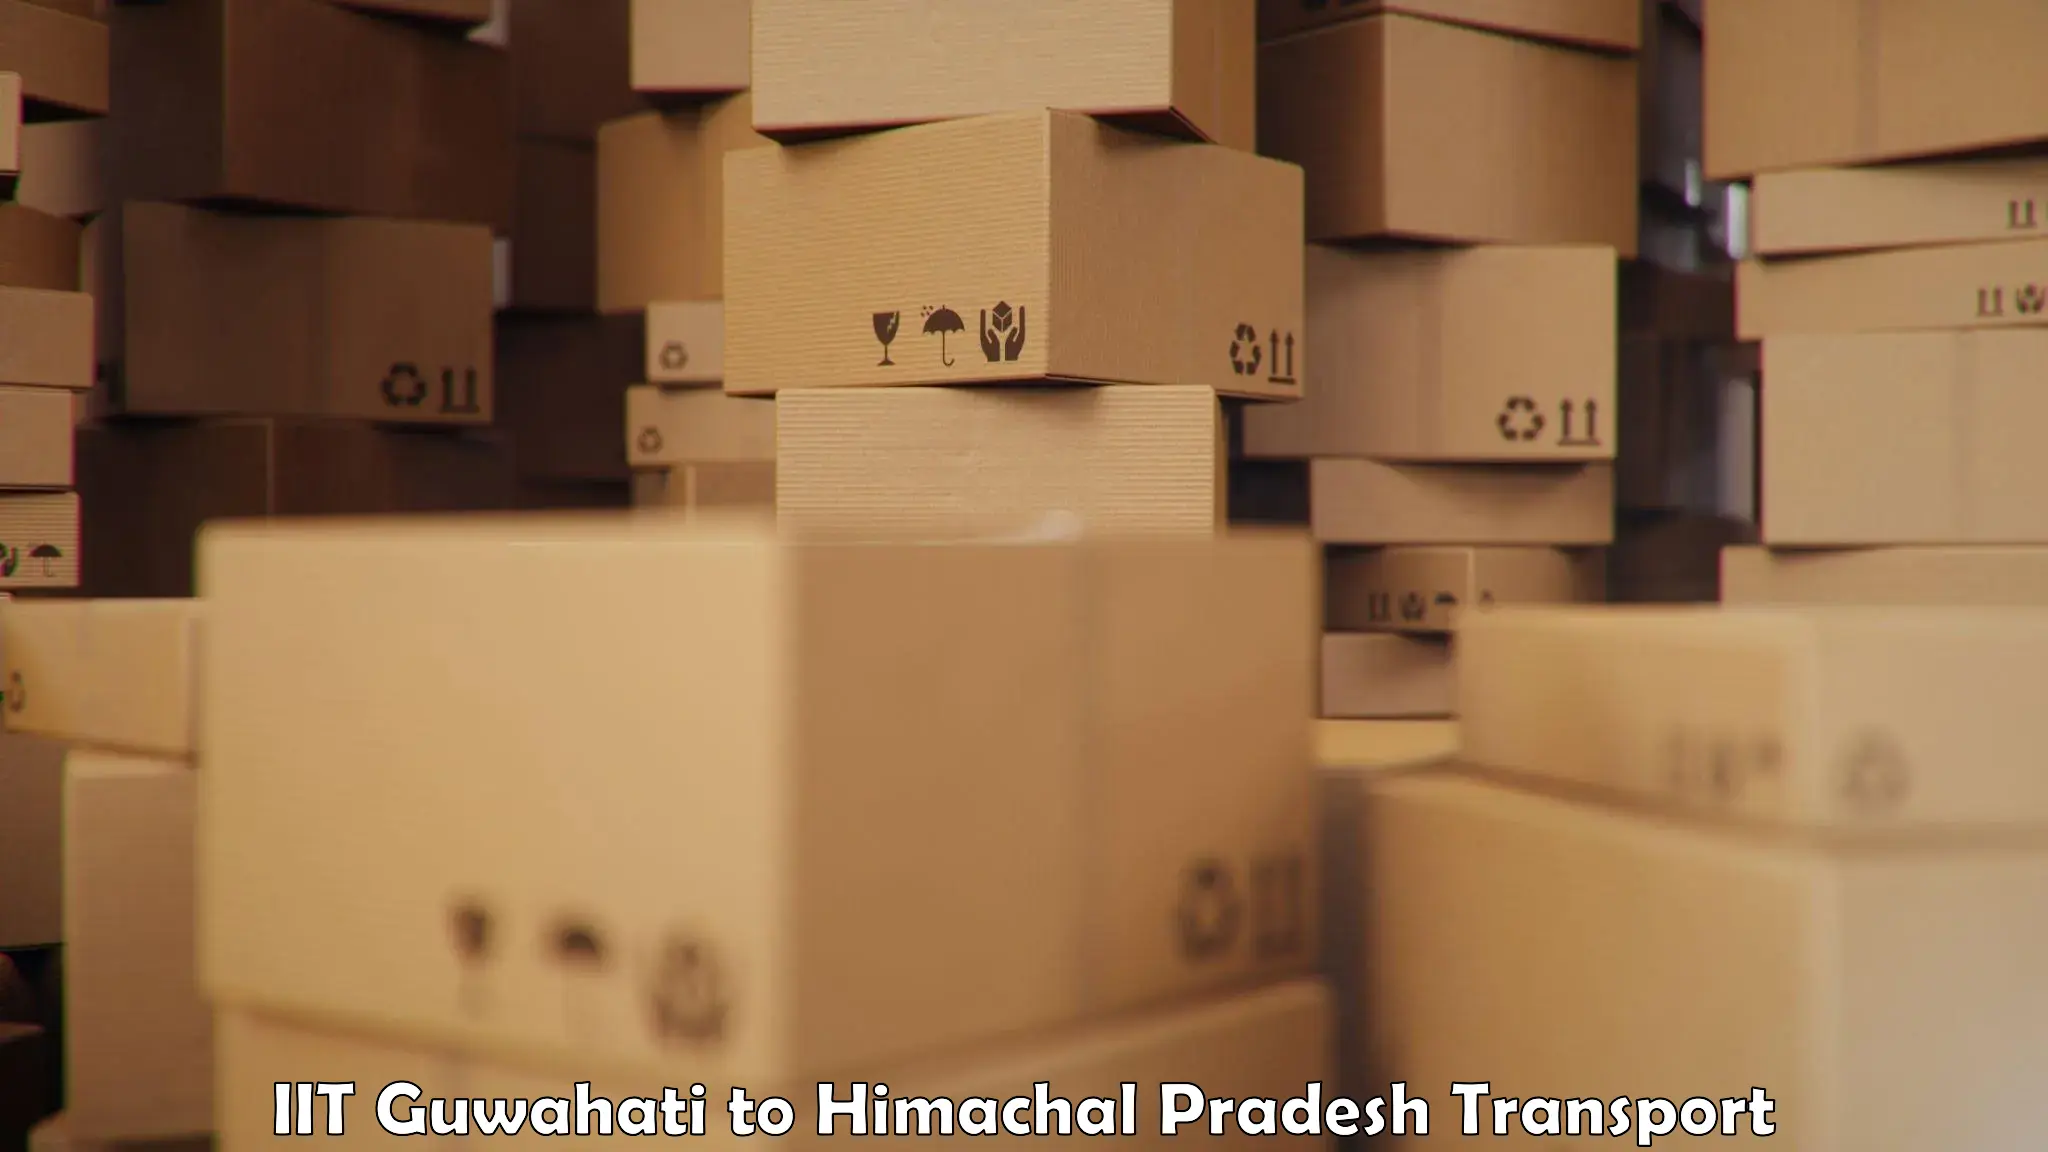 Container transport service IIT Guwahati to Lahaul and Spiti